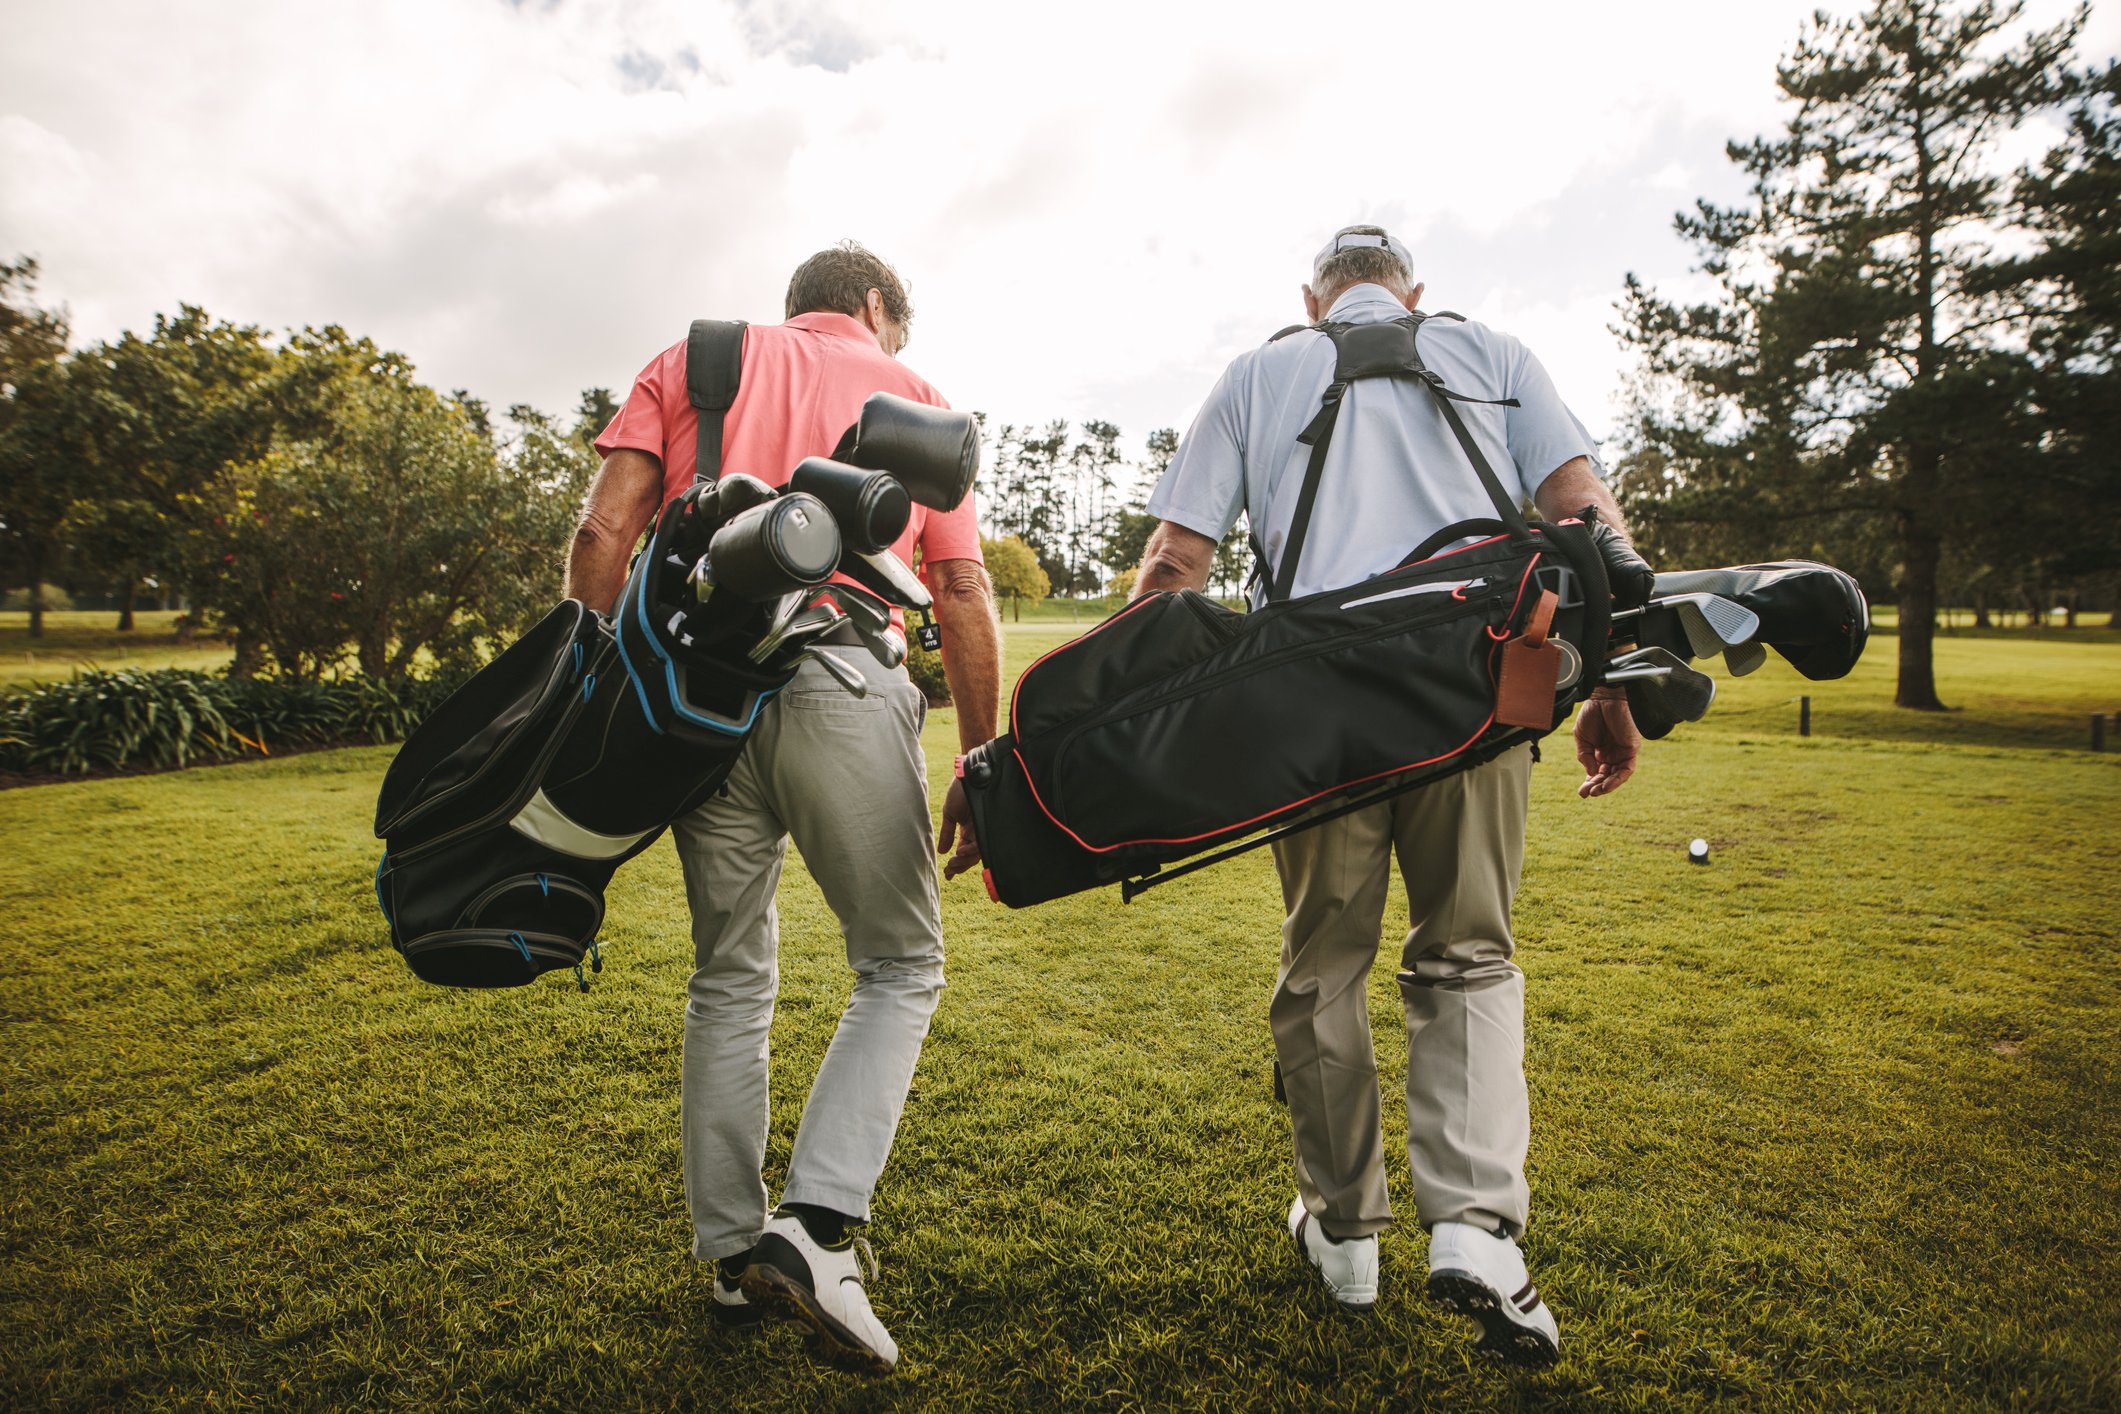 Two men with golf bags walking on a golf course.